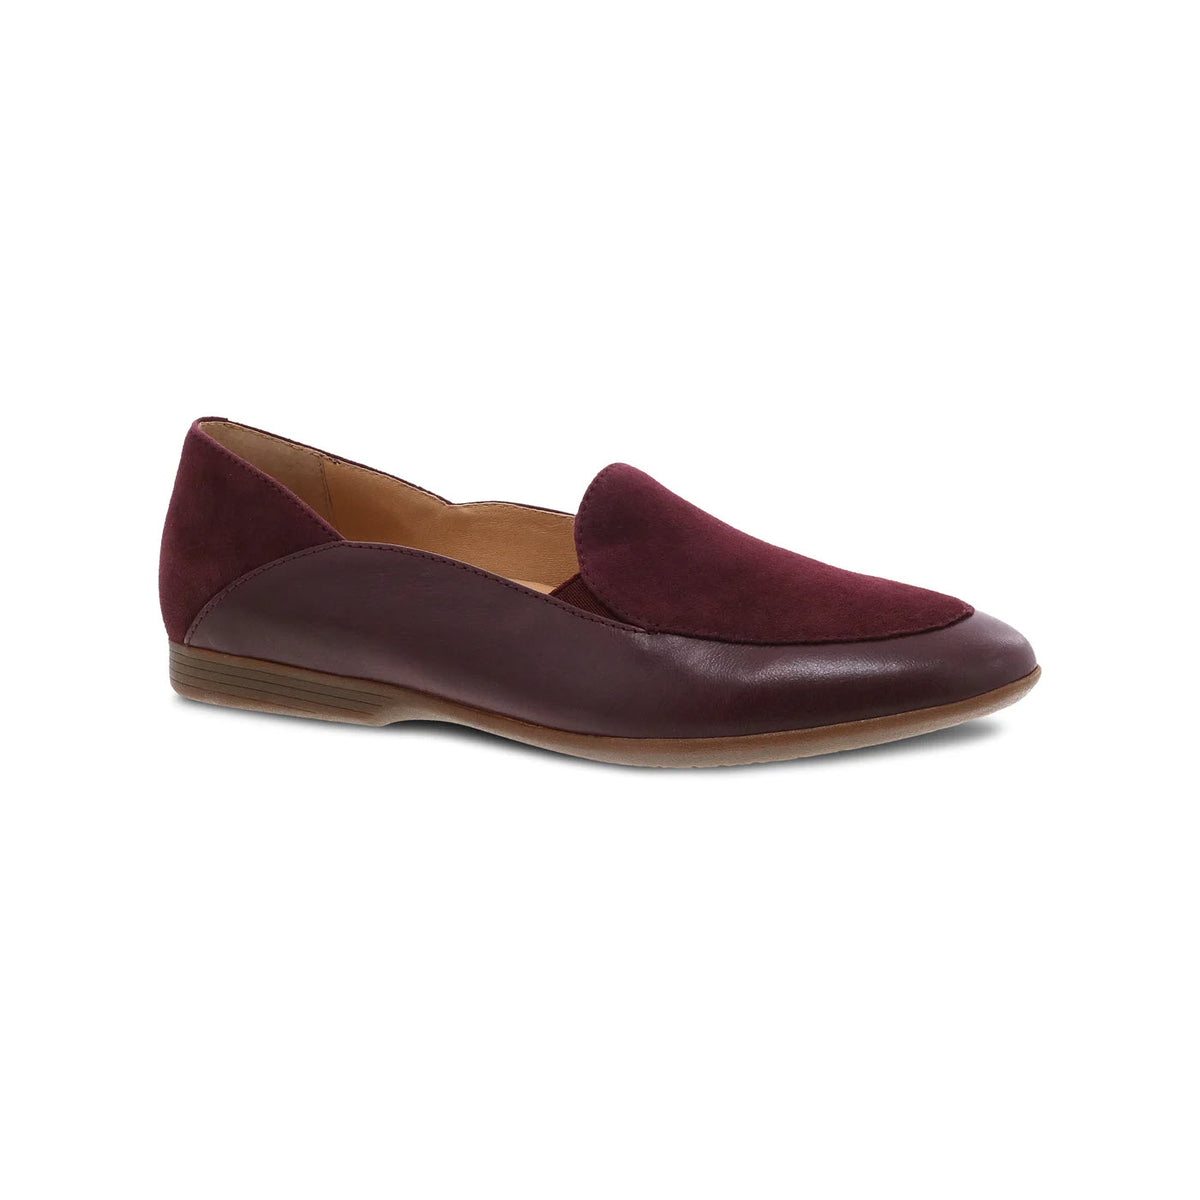 A burgundy Dansko lace wine glazed women&#39;s loafer featuring a velvety upper and a smooth, buttery soft leather toe, displayed against a white background.